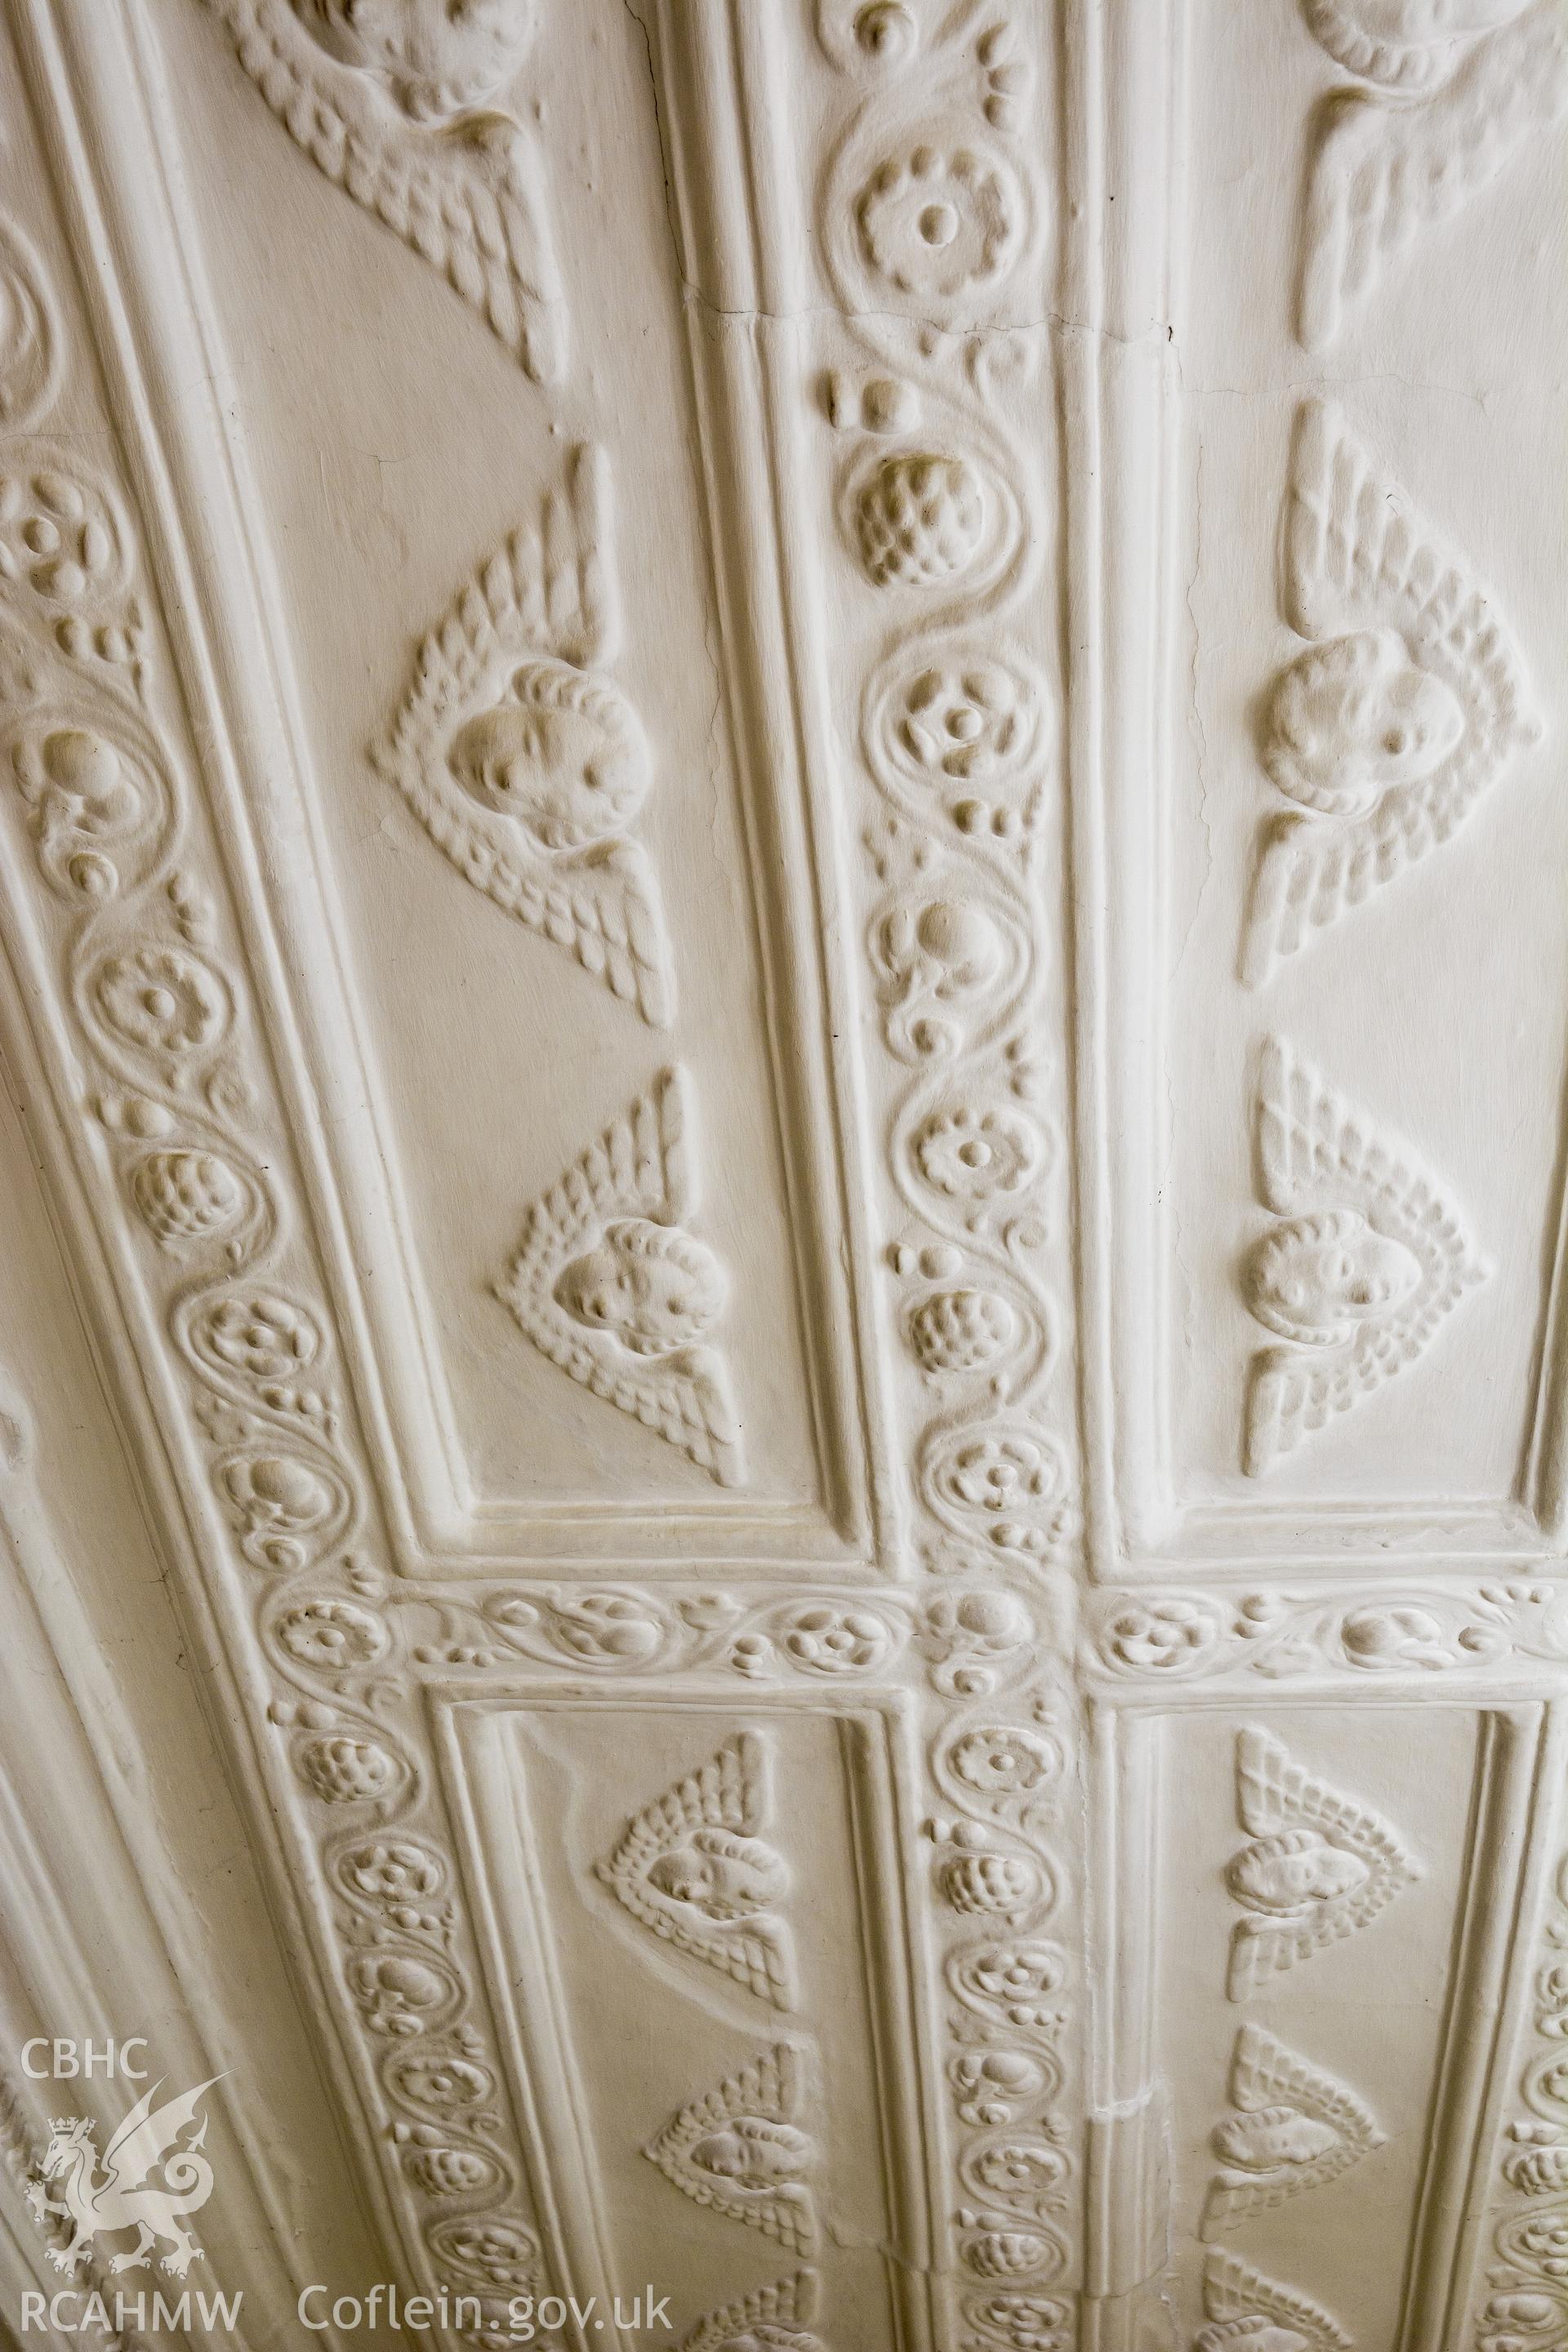 Principal chamber ceiling detail, taken by Martin Crampin for RCAHMW 21st March 2017.